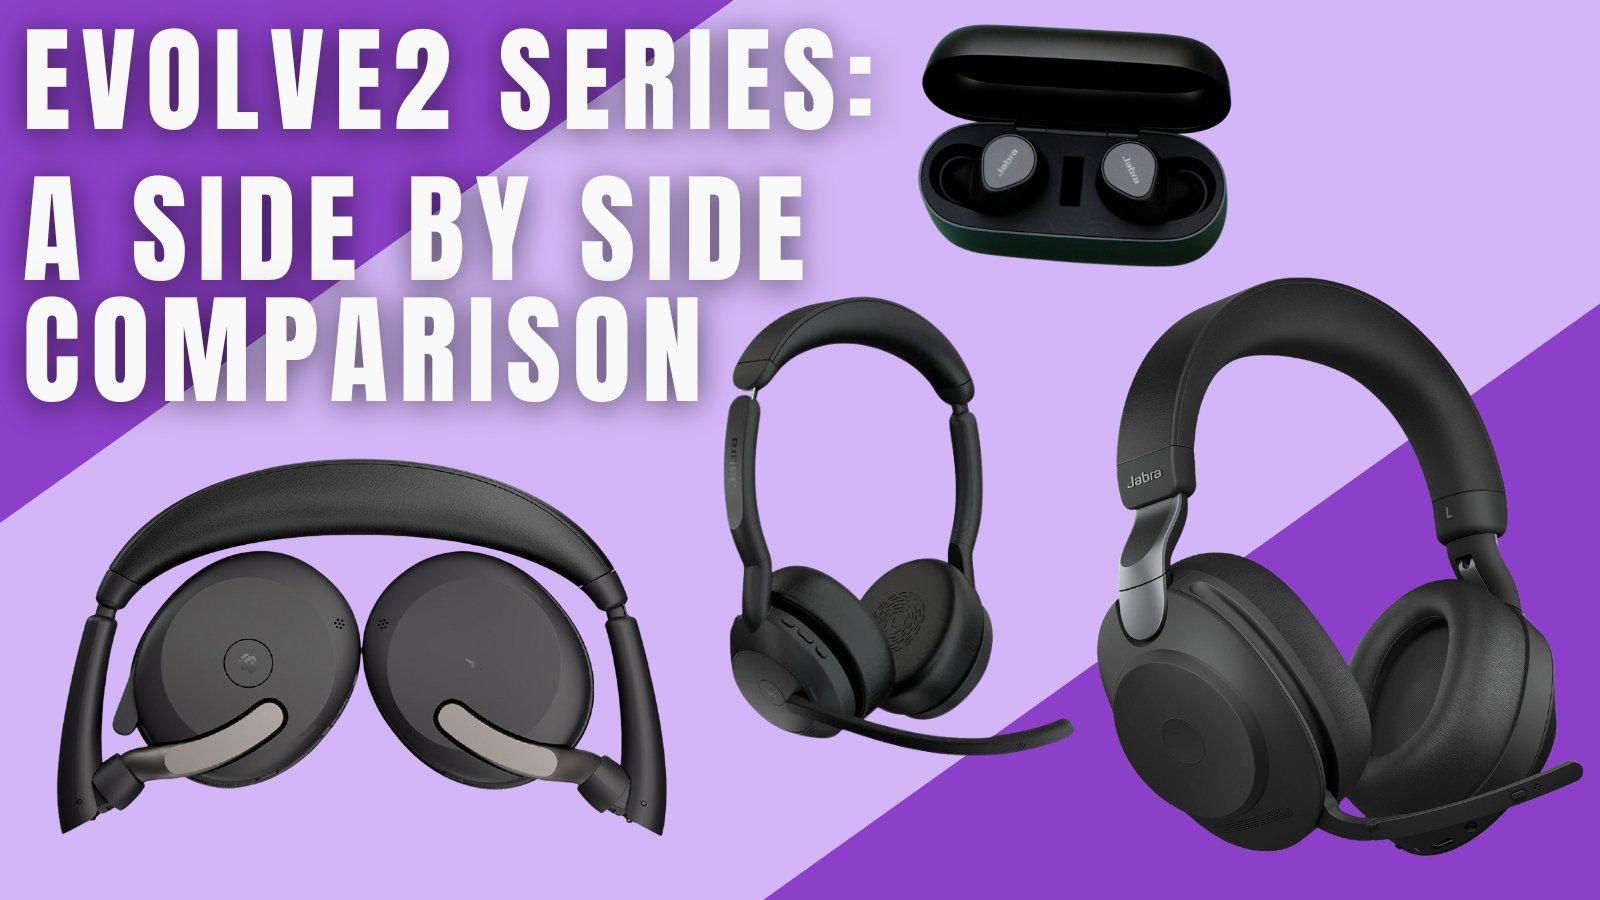 Jabra Evolve2 Series Review & Comparison: Which Headset is Right for You? - Headset Advisor